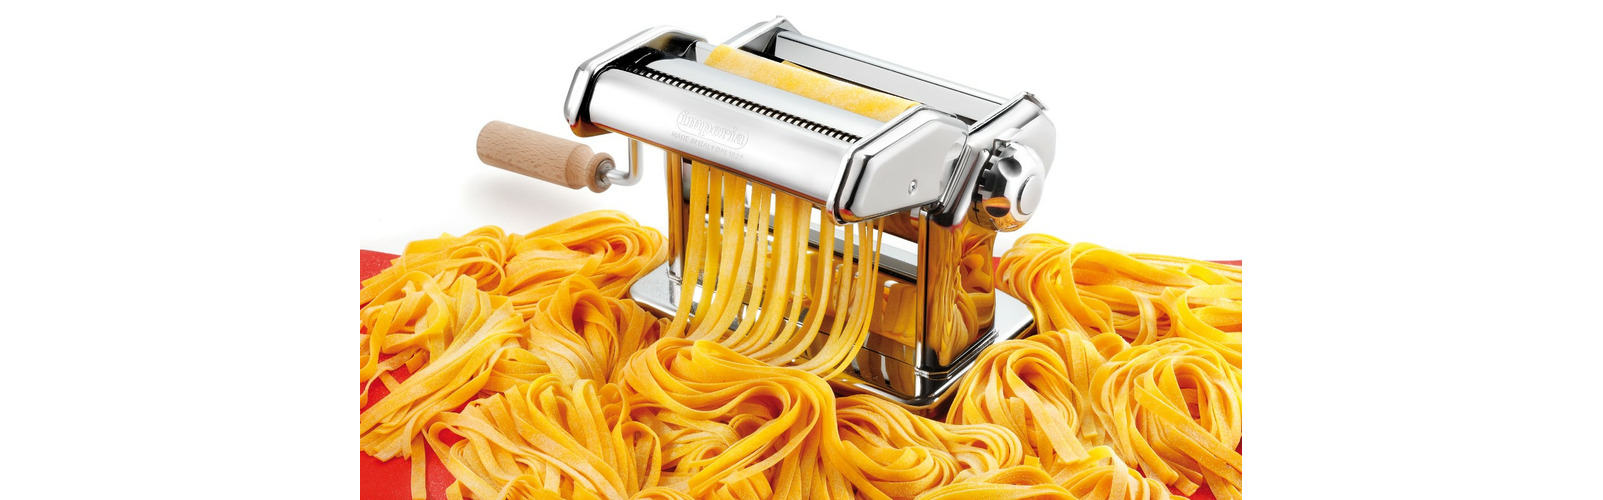 Imperia - Pasta Machines - Day and Age